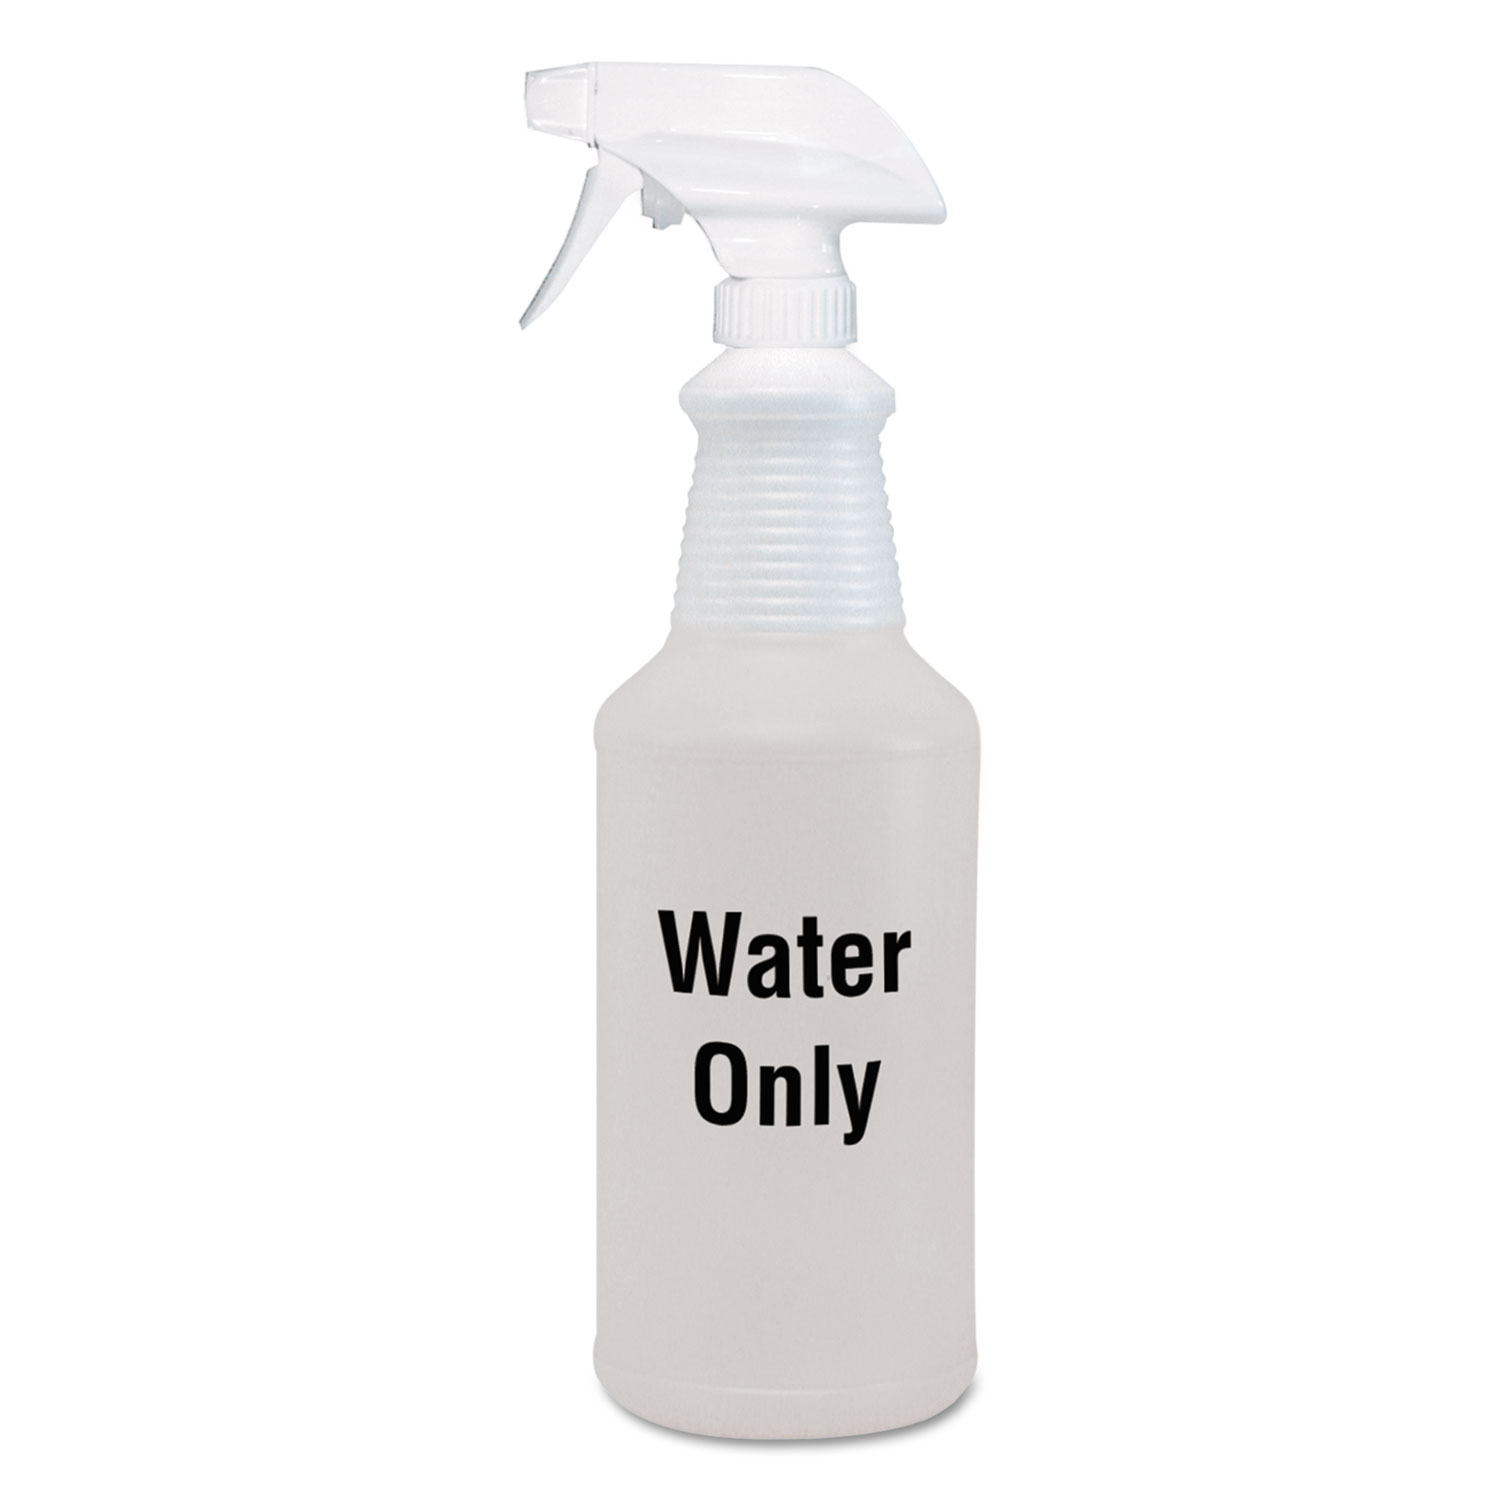 Water Only Spray Bottle, Clear, 32 oz, 12/Carton